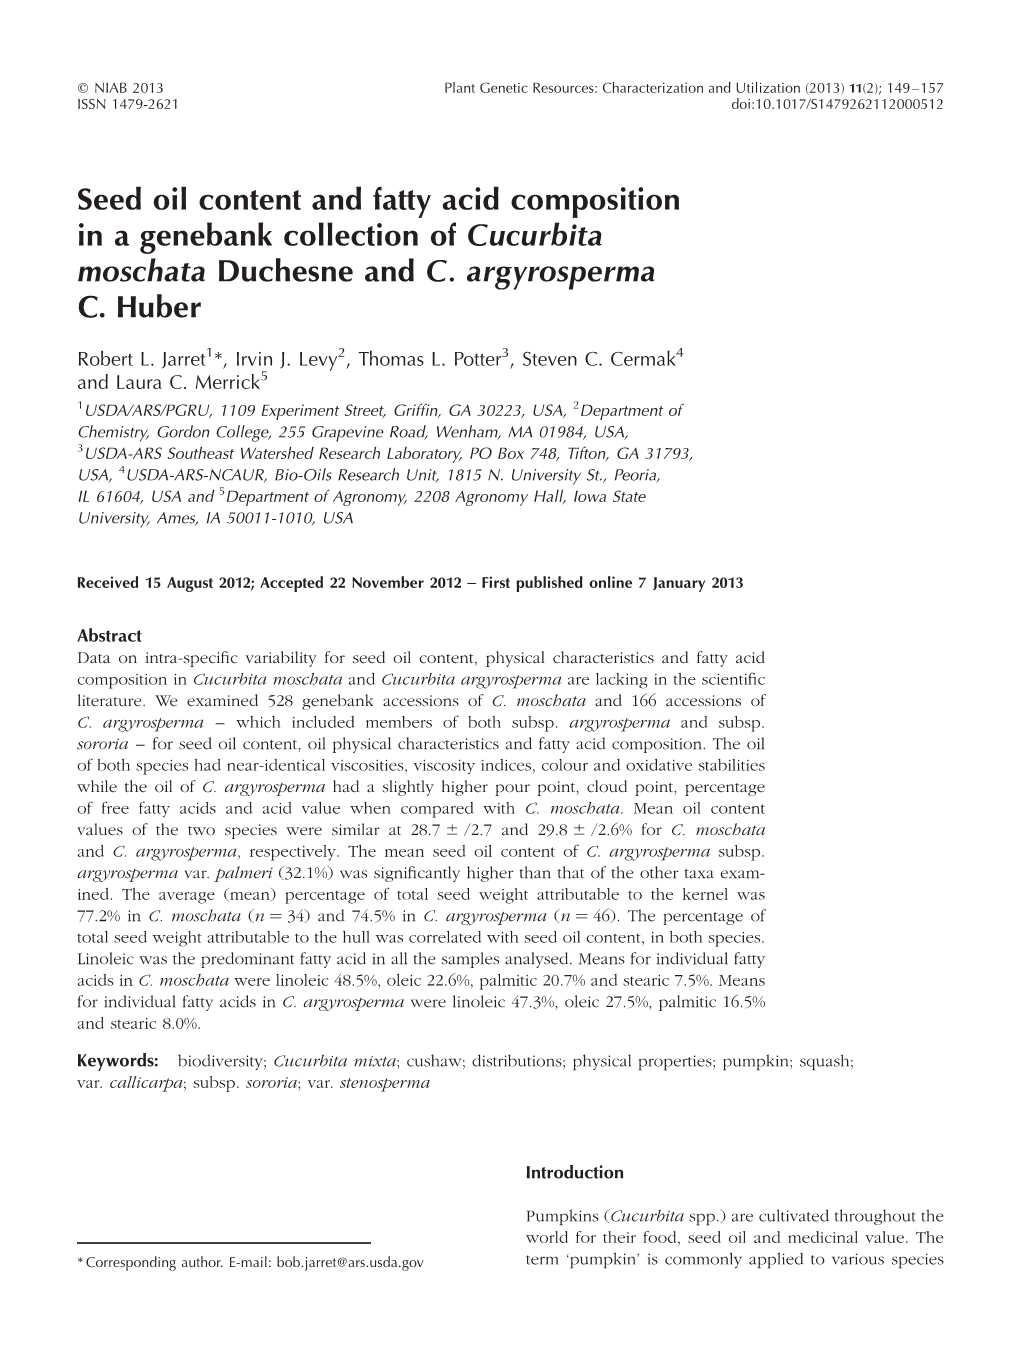 Seed Oil Content and Fatty Acid Composition in a Genebank Collection of Cucurbita Moschata Duchesne and C. Argyrosperma C. Huber